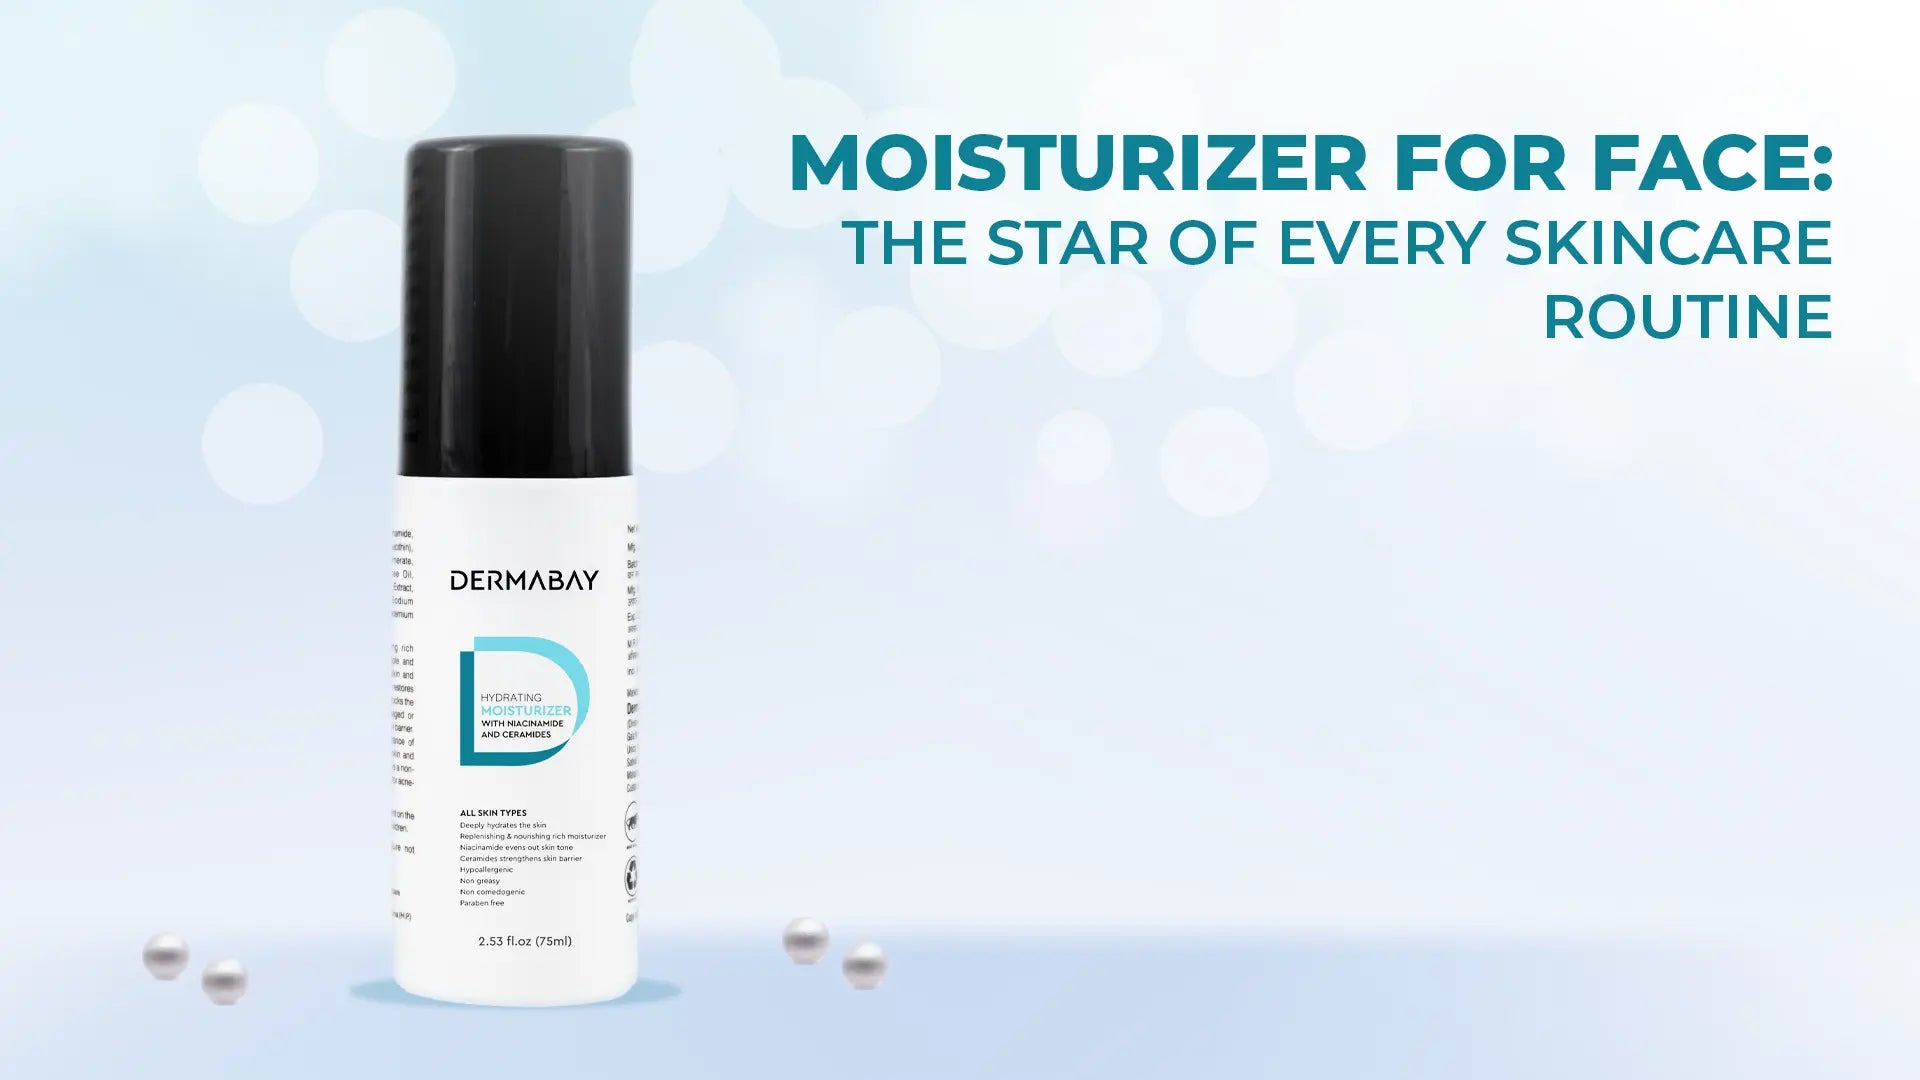 Moisturizer For Face: The Star of Every Skincare Routine